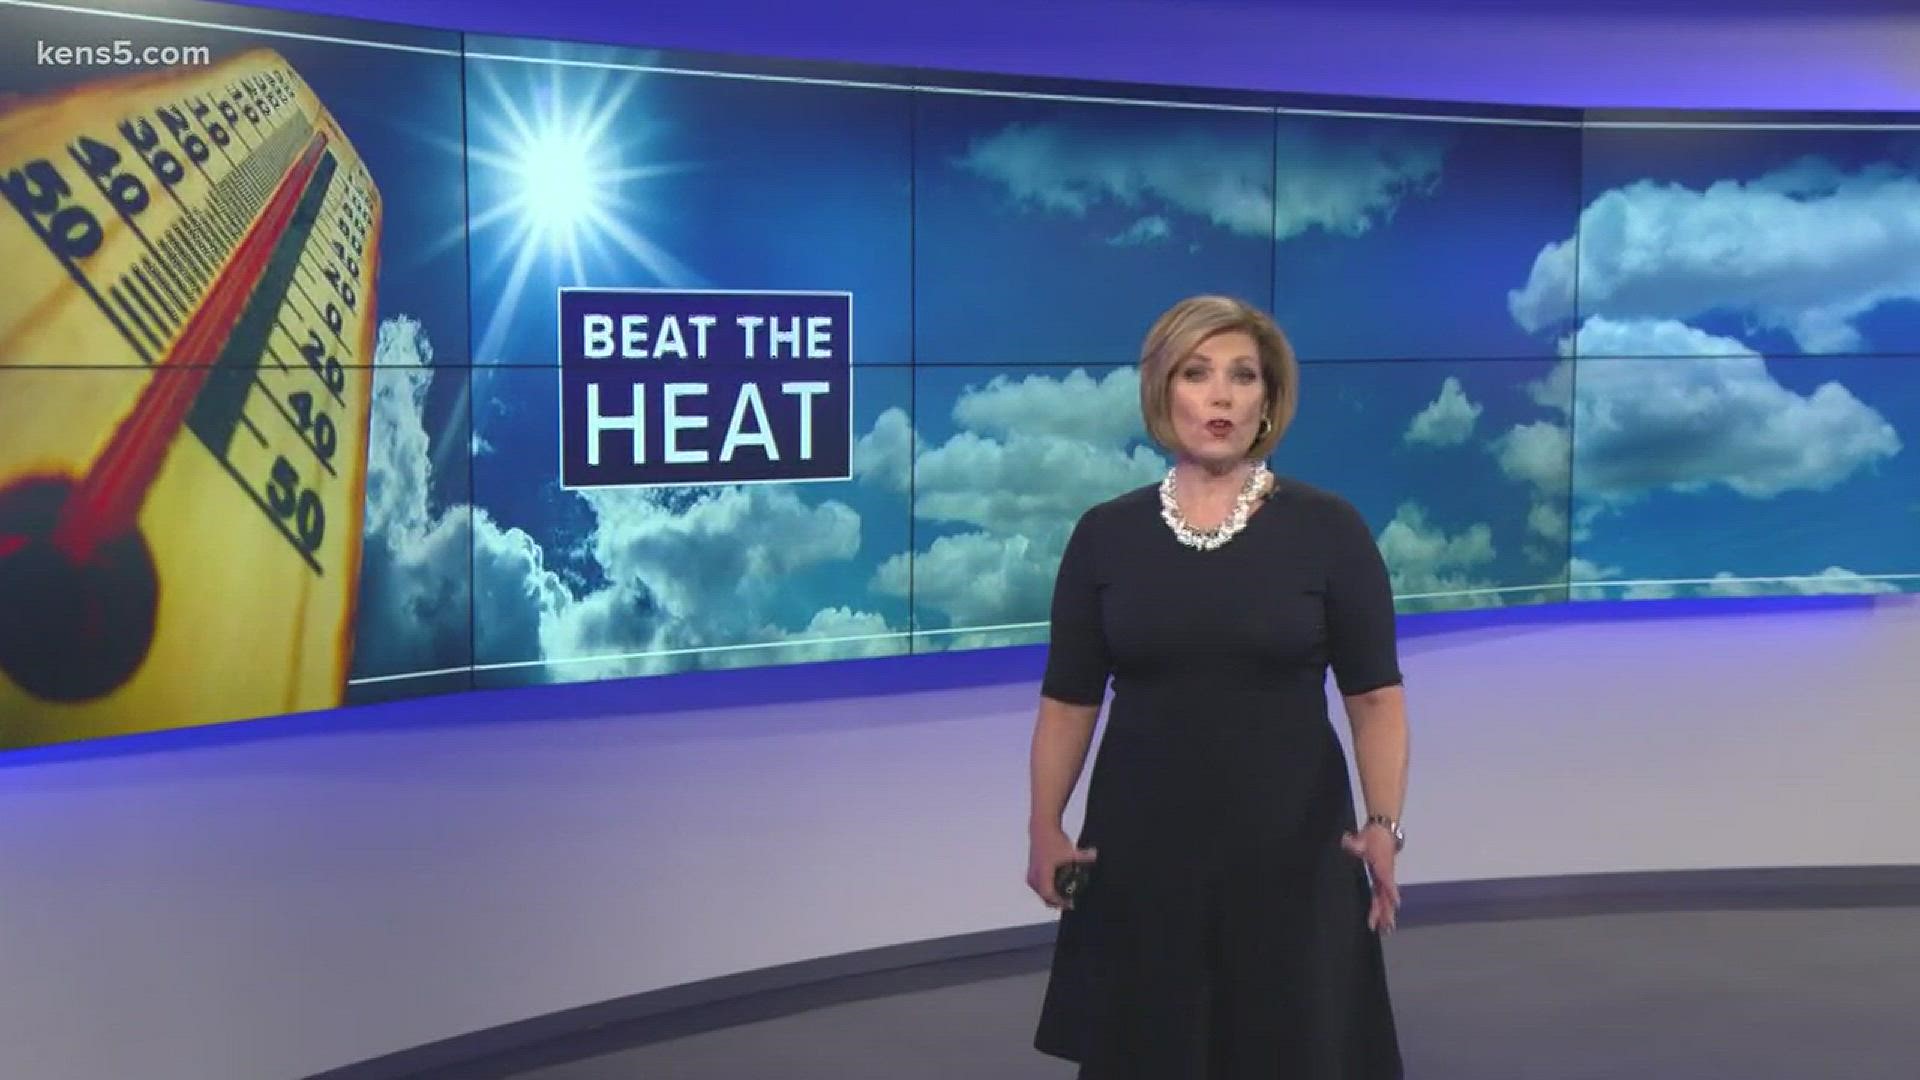 Through the brutal heat   -- there's one thing San Antonians know how to do: cool off. Eyewitness News reporter Sharon Ko shows us how they're doing just that -- with a splash and on the dance floor.